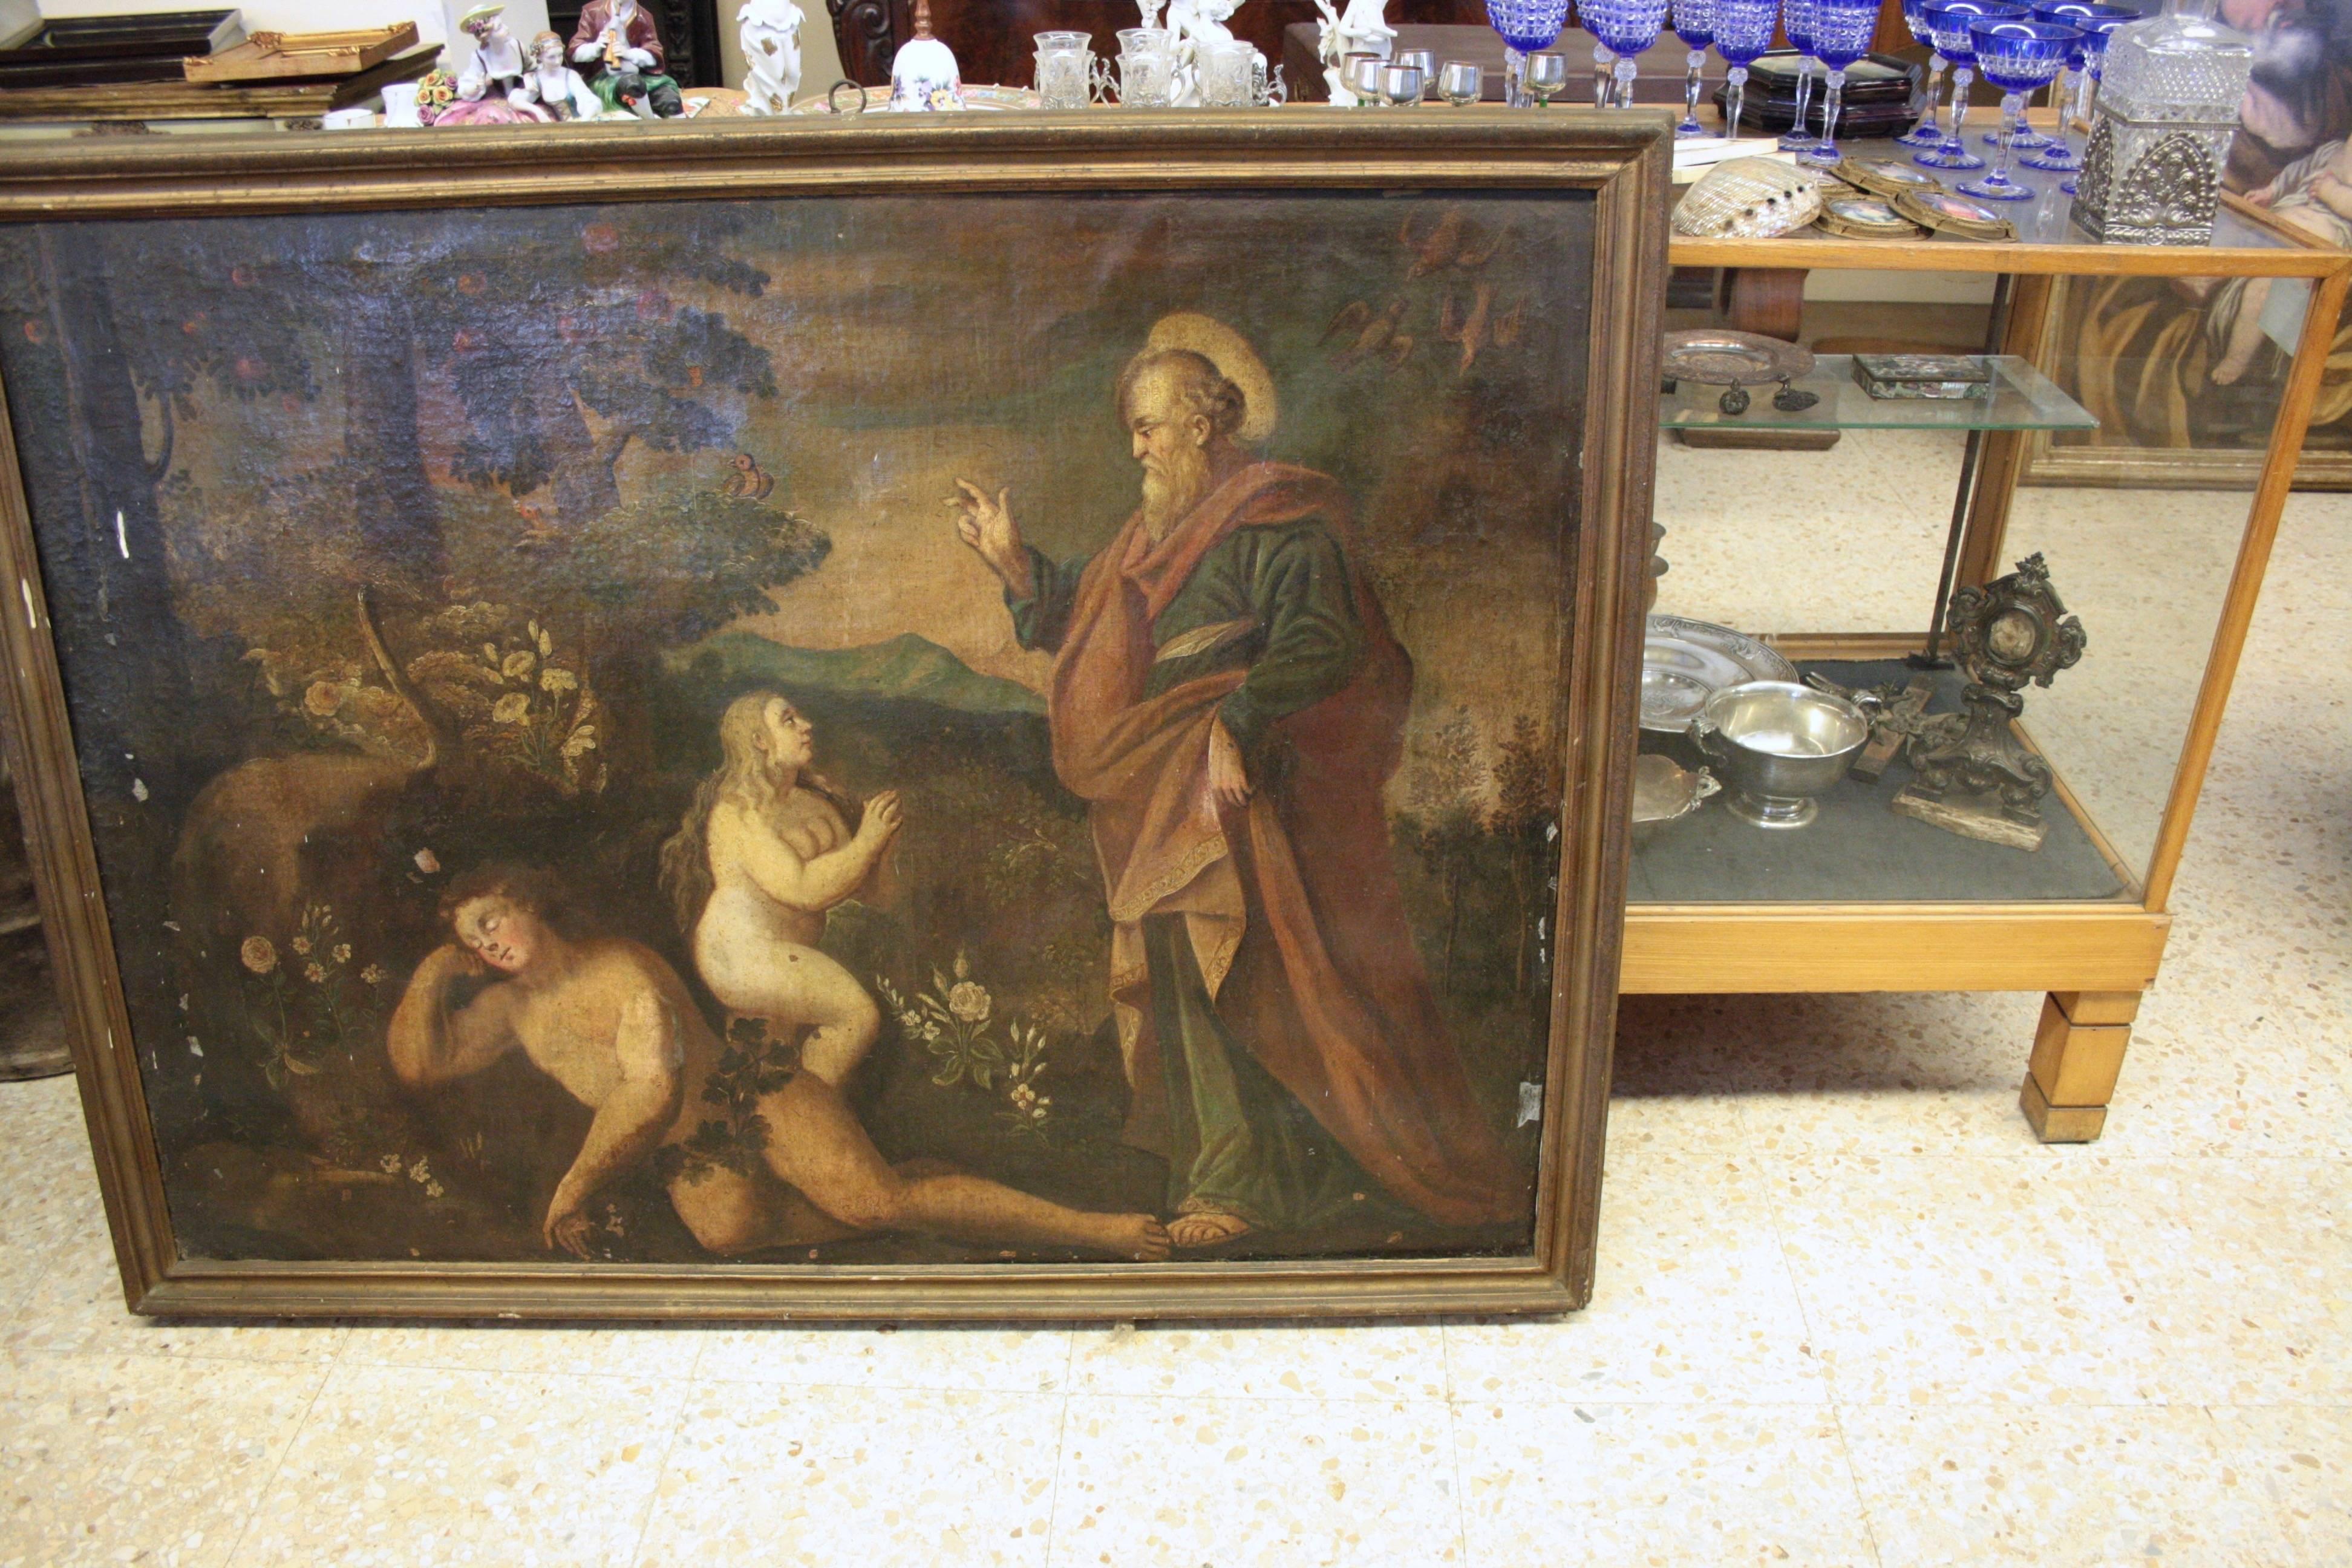 17th century old painting, Italian, oil on canvas the creation of Eve
Great masterpiece of authentic Italian painting history, The Creation of Eve, with Adam.
Painting in his original state on his original frame.
Measures: Lenght 135 cm
Height